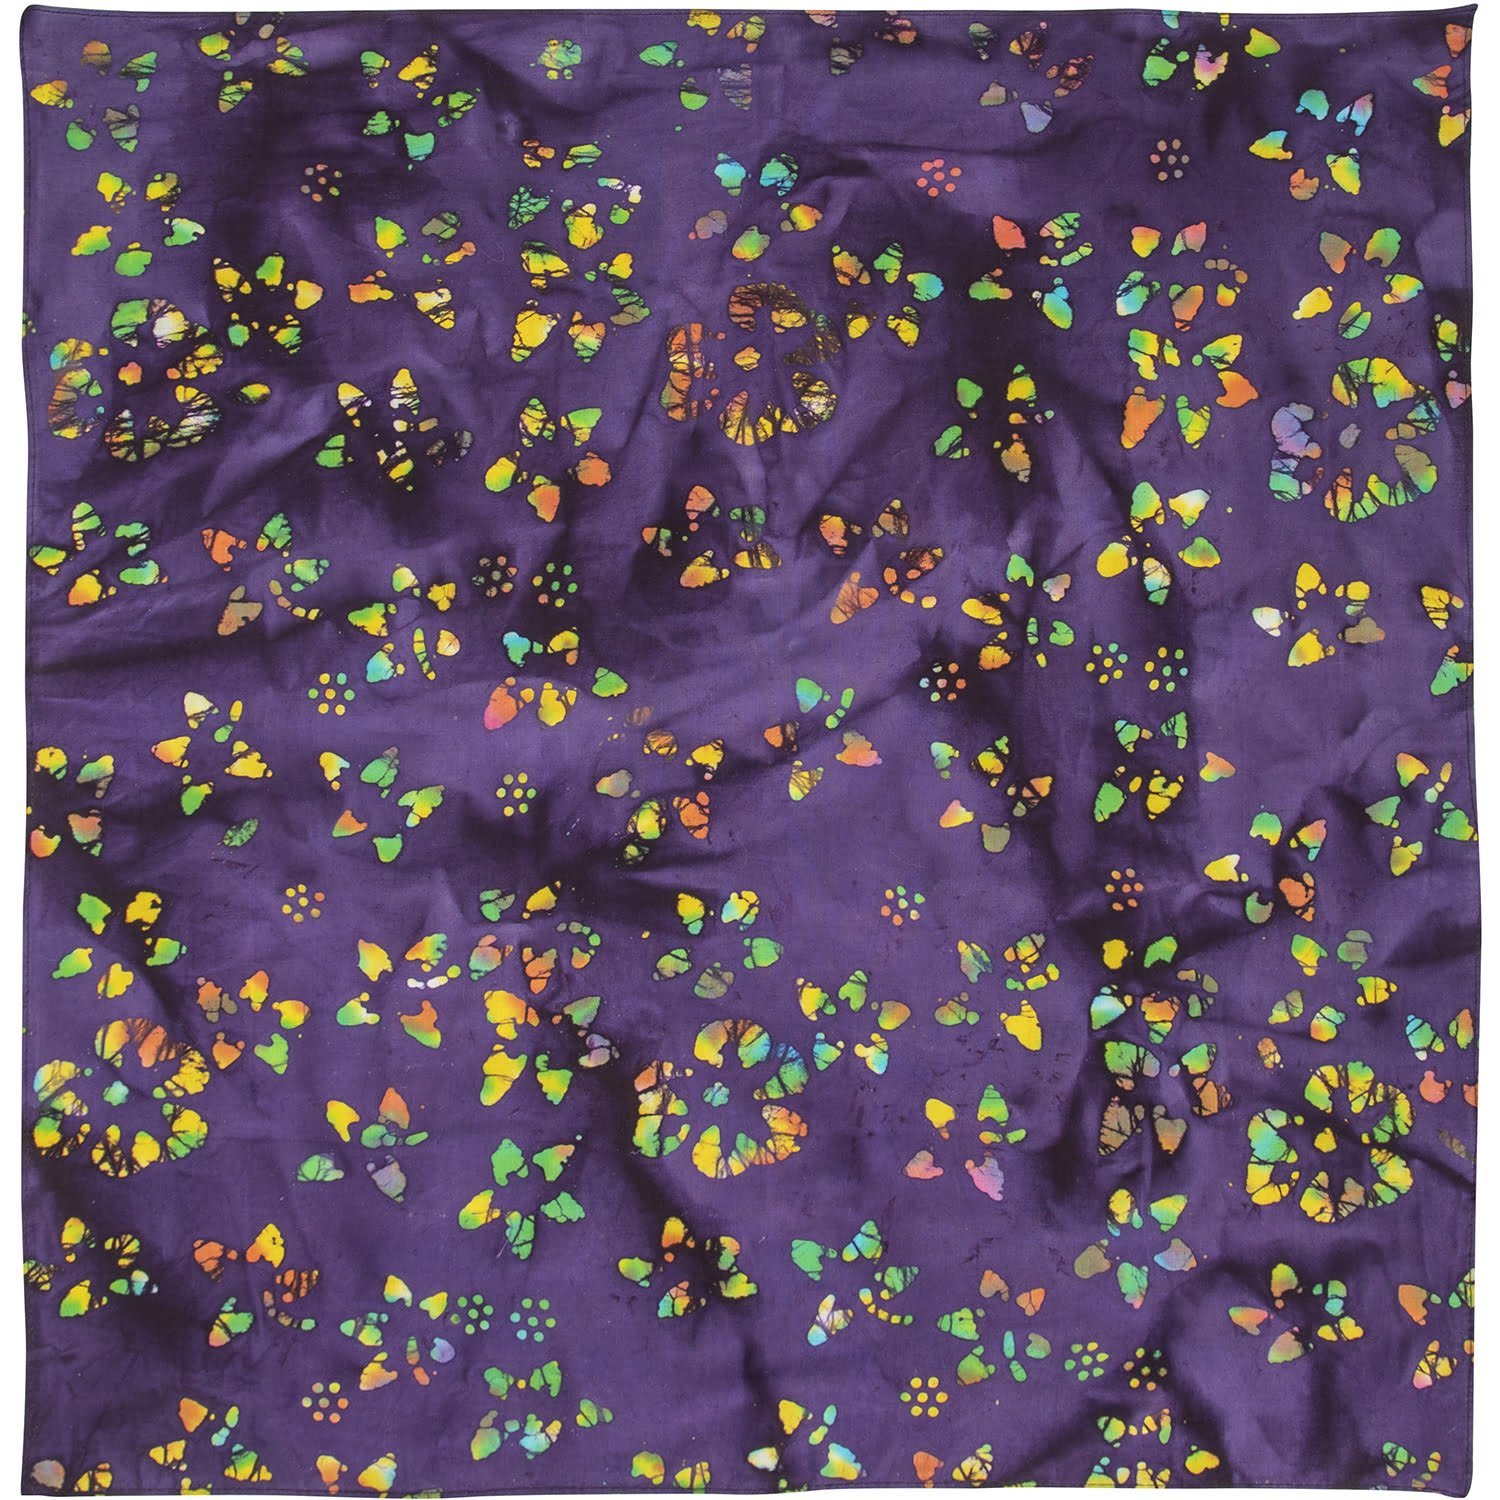 Batik Purple Bandana – 22x22 inches, a high-quality import from India, made from 100% Cotton with a 68x68 thread count.